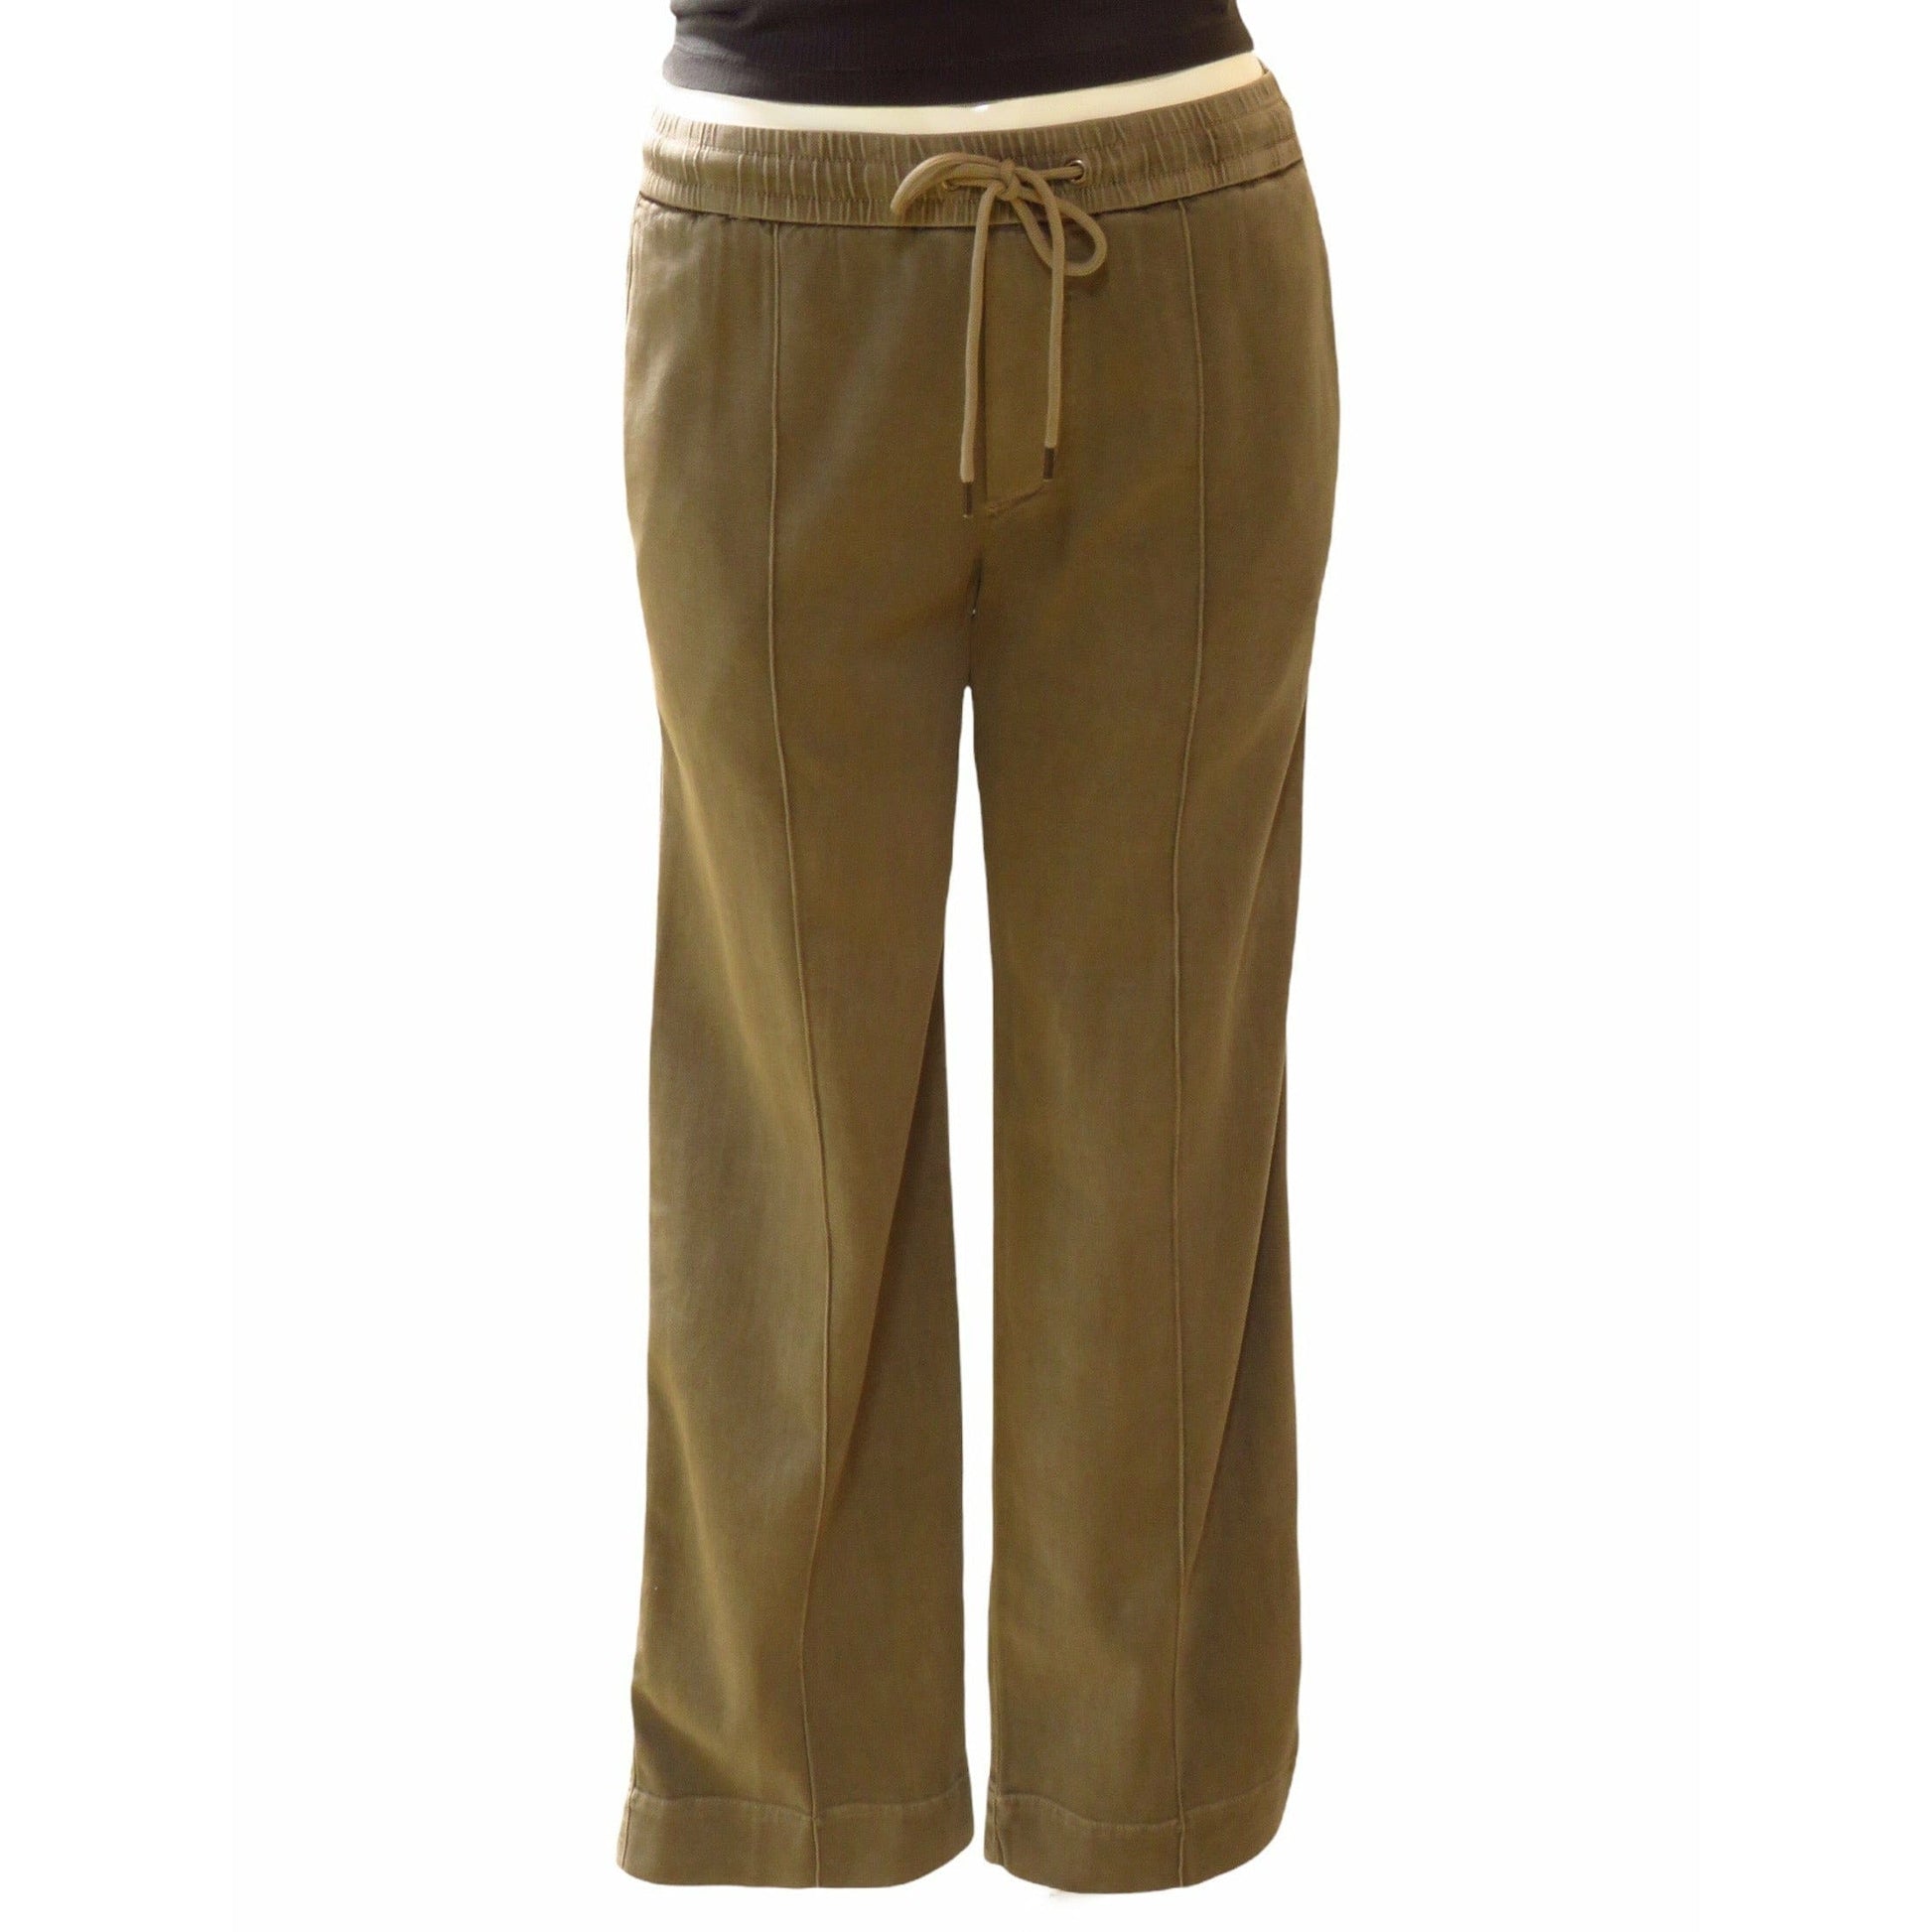 James Perse Pants 1 / Greystone Pigment / Twill James Perse Relaxed Twill Pants